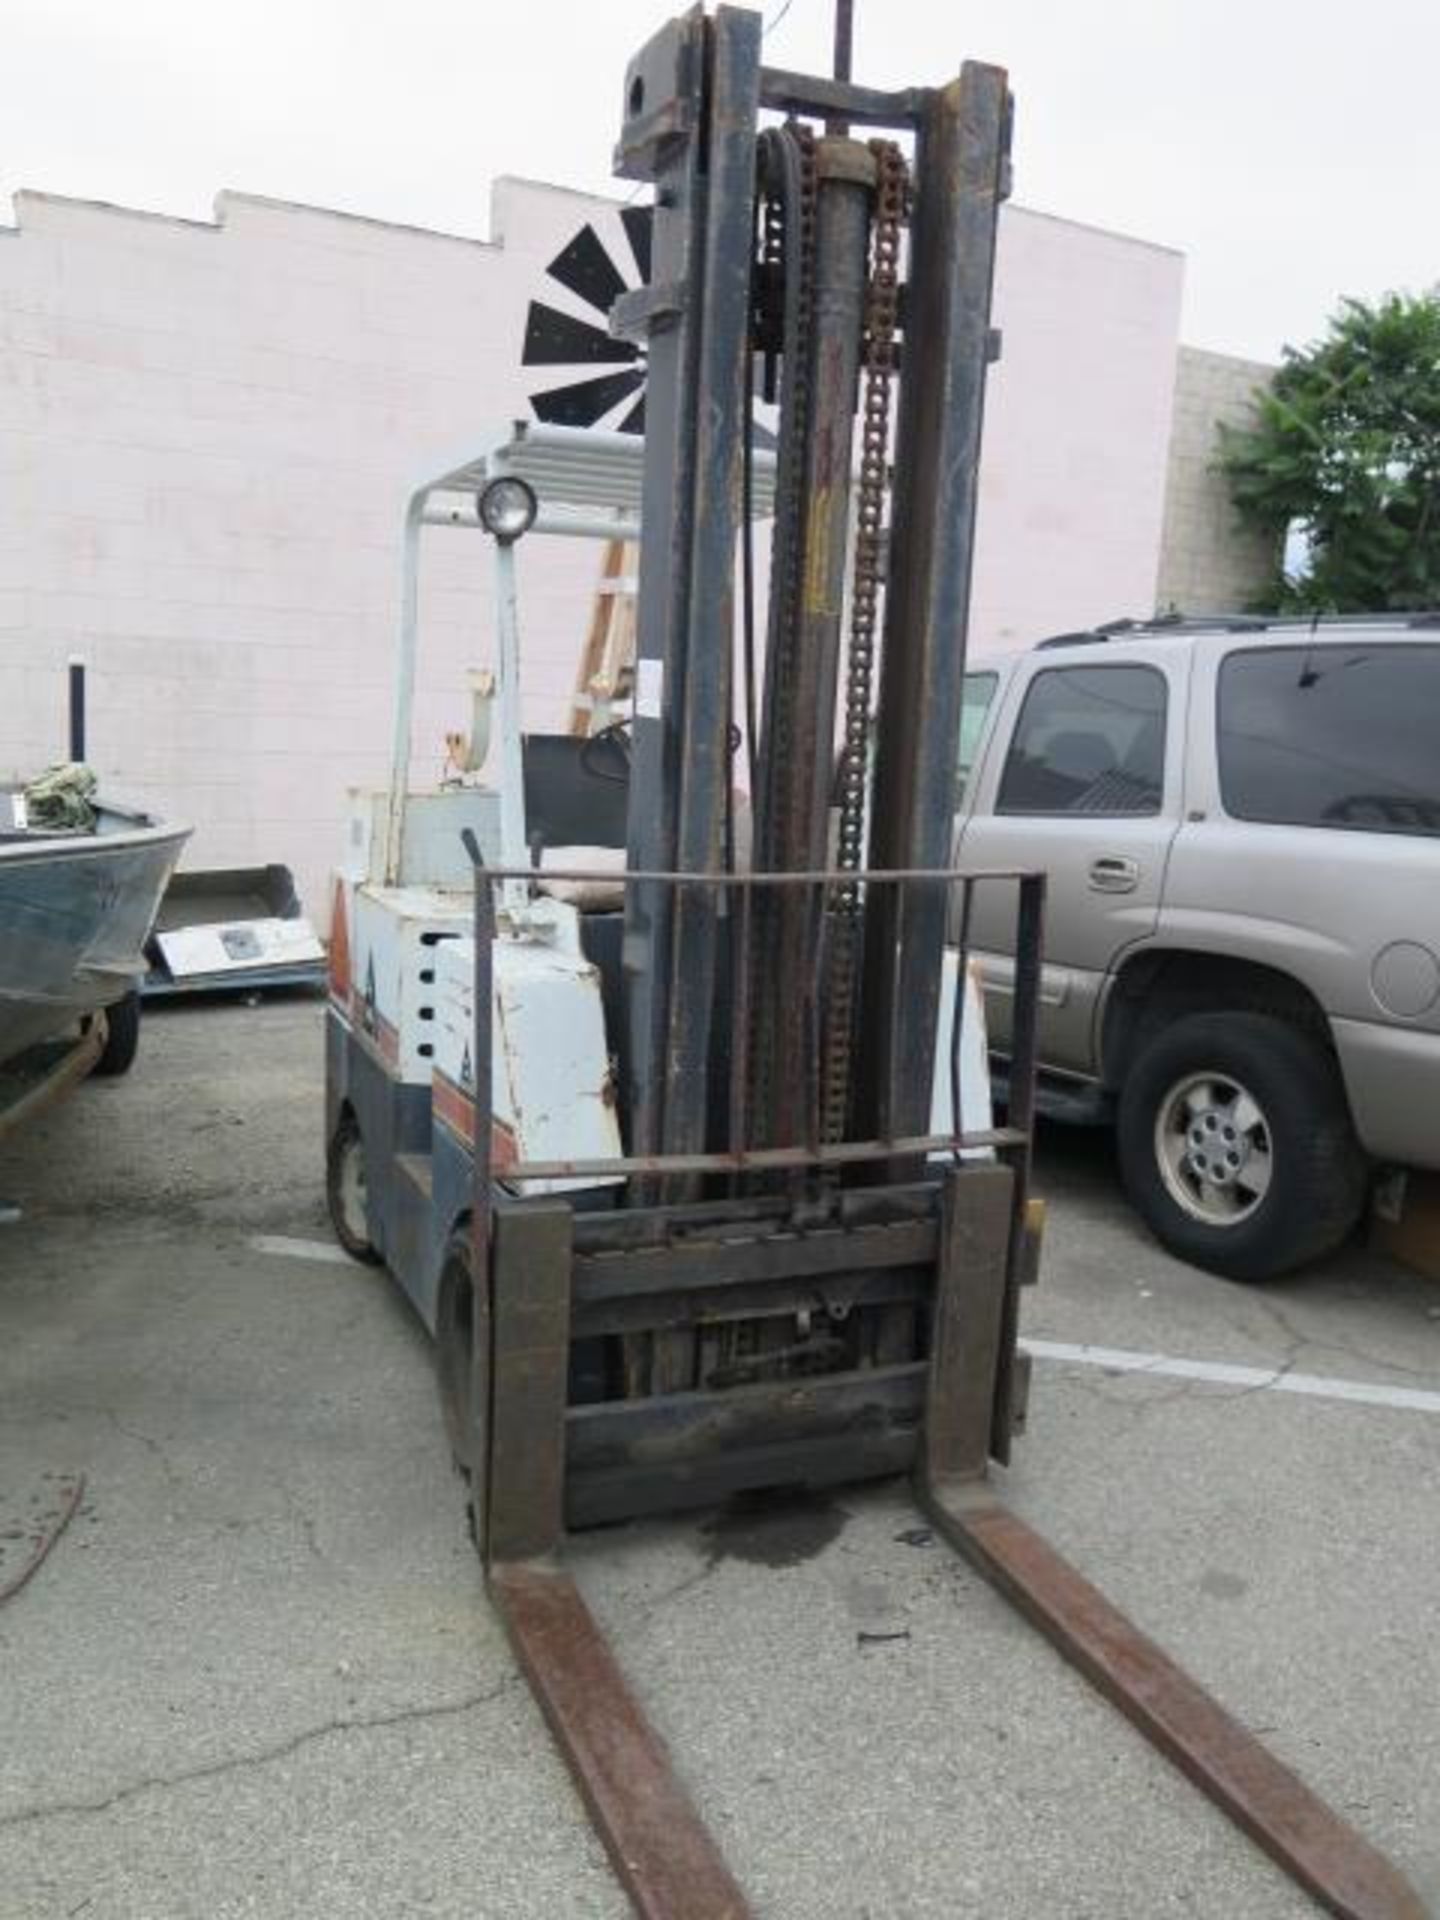 Allis Chalmers ACC70L 6100 Lb Cap LPG Forklift s/n ACL507599 w/ 2-Stage, 168” Lift Height,SOLD AS IS - Image 2 of 11